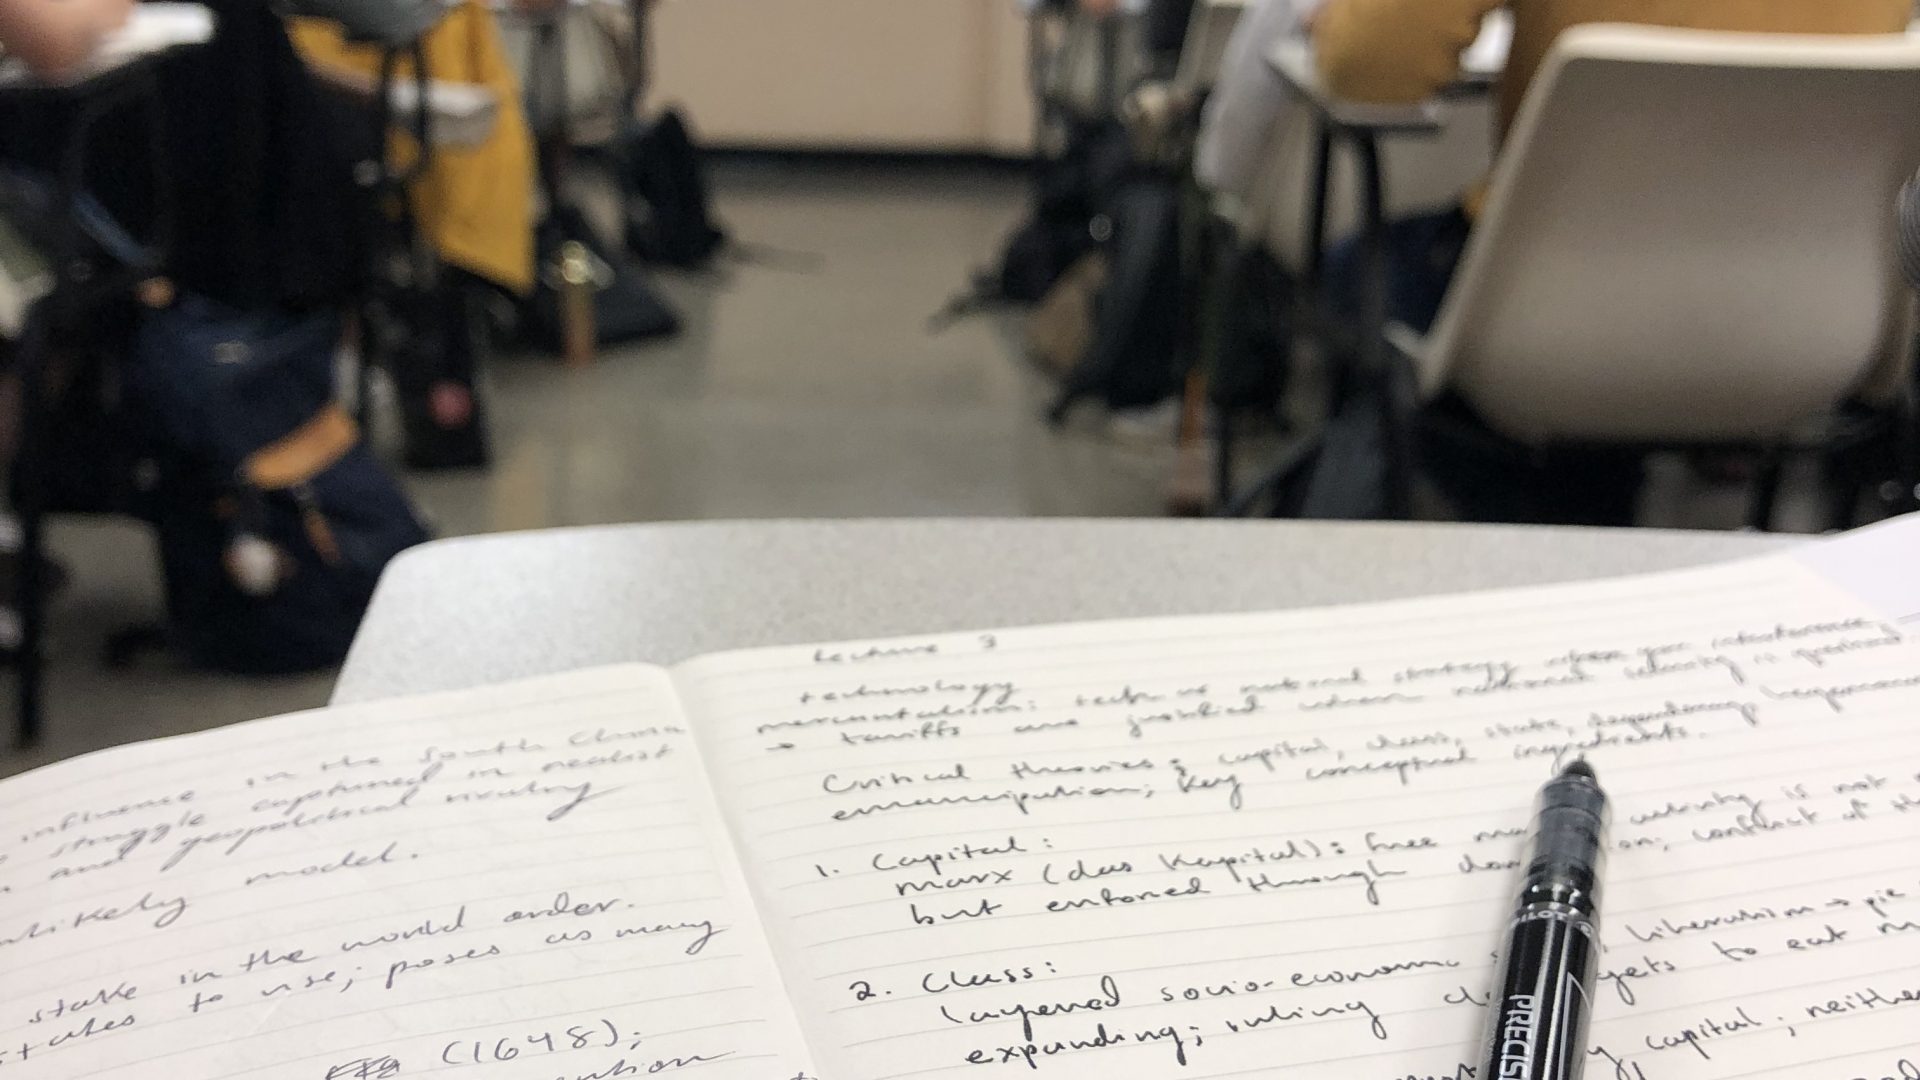 image of notes on a desk in class